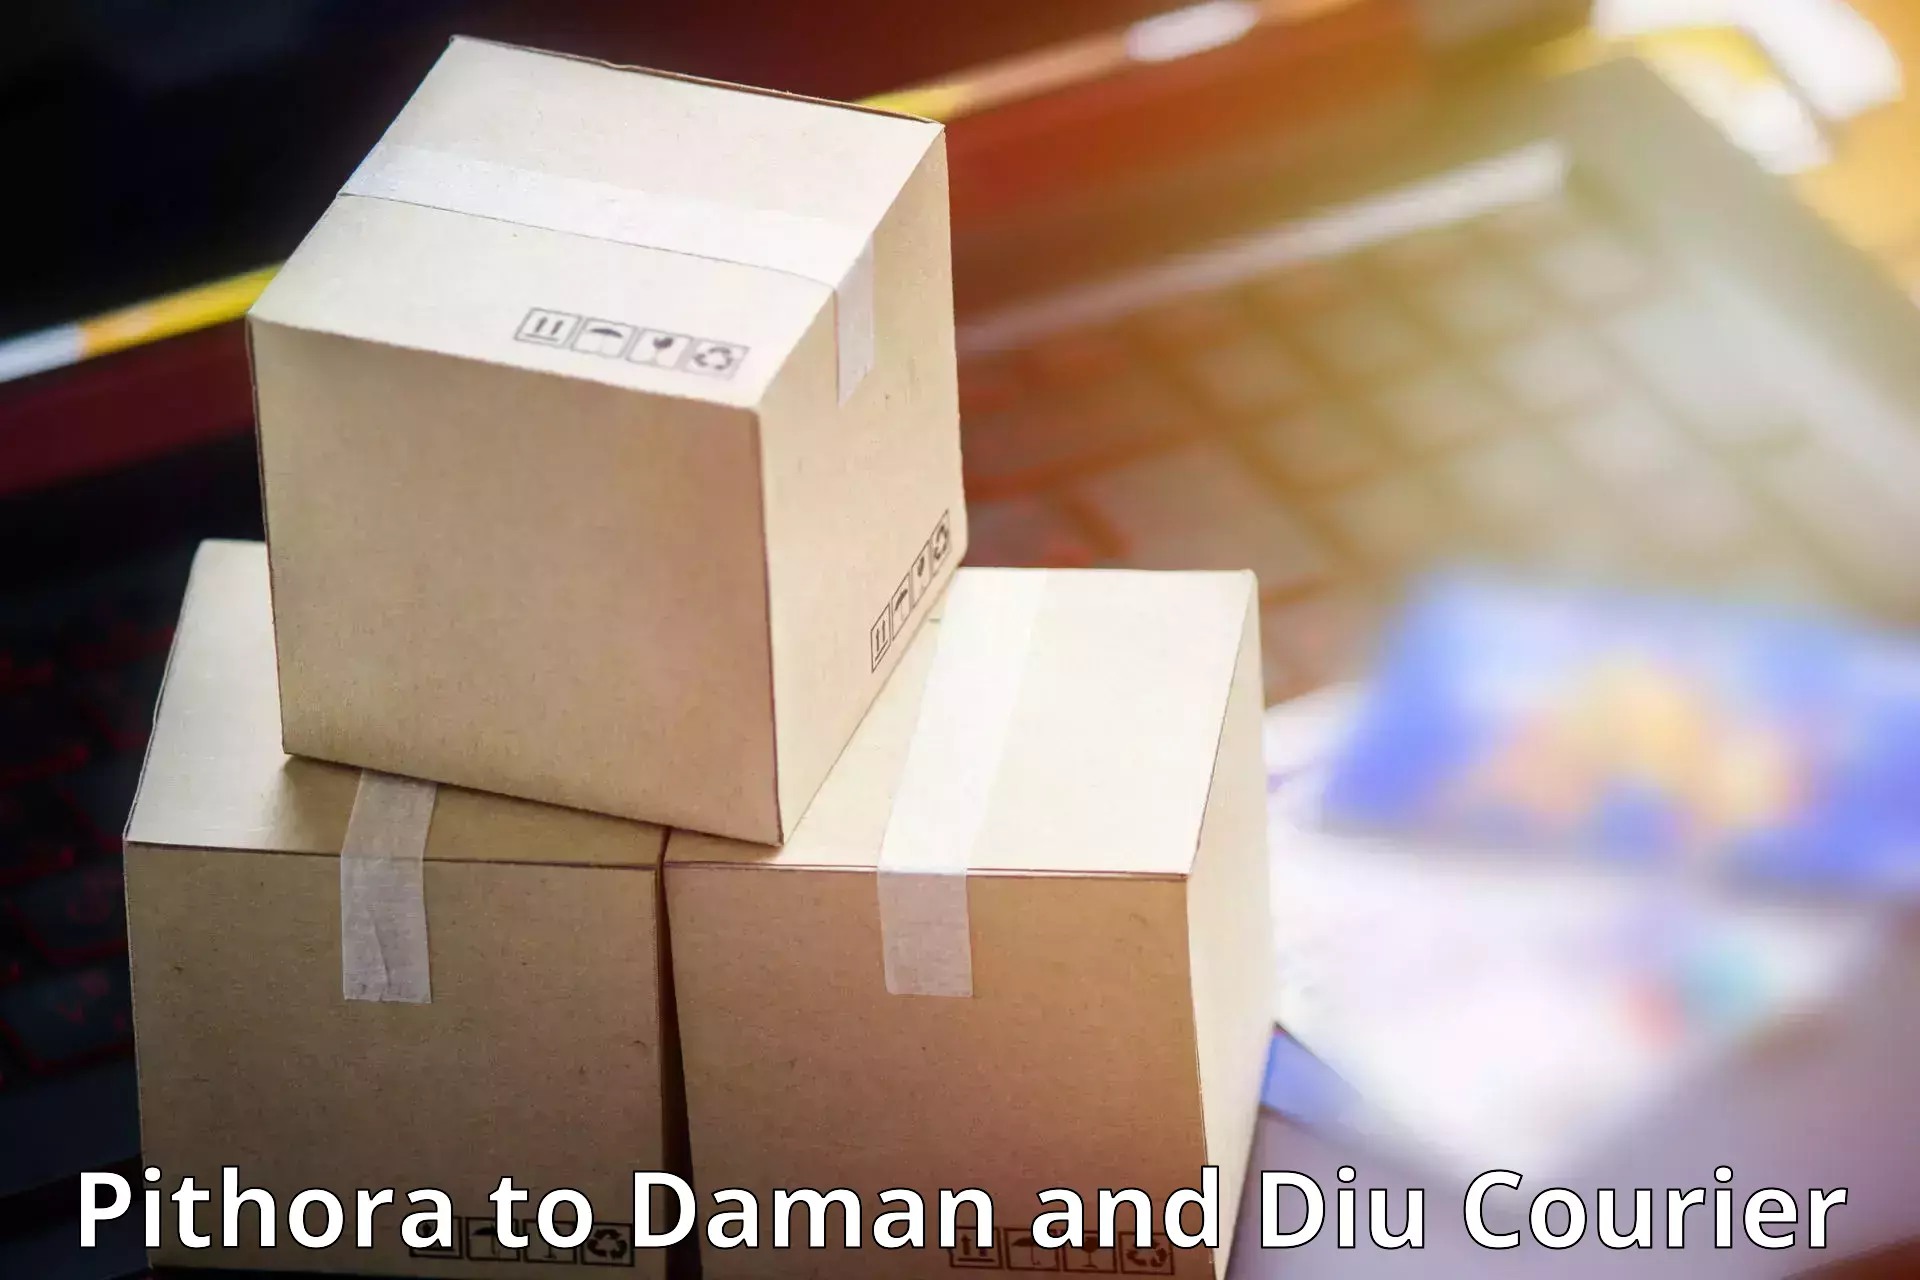 Full-service courier options Pithora to Diu